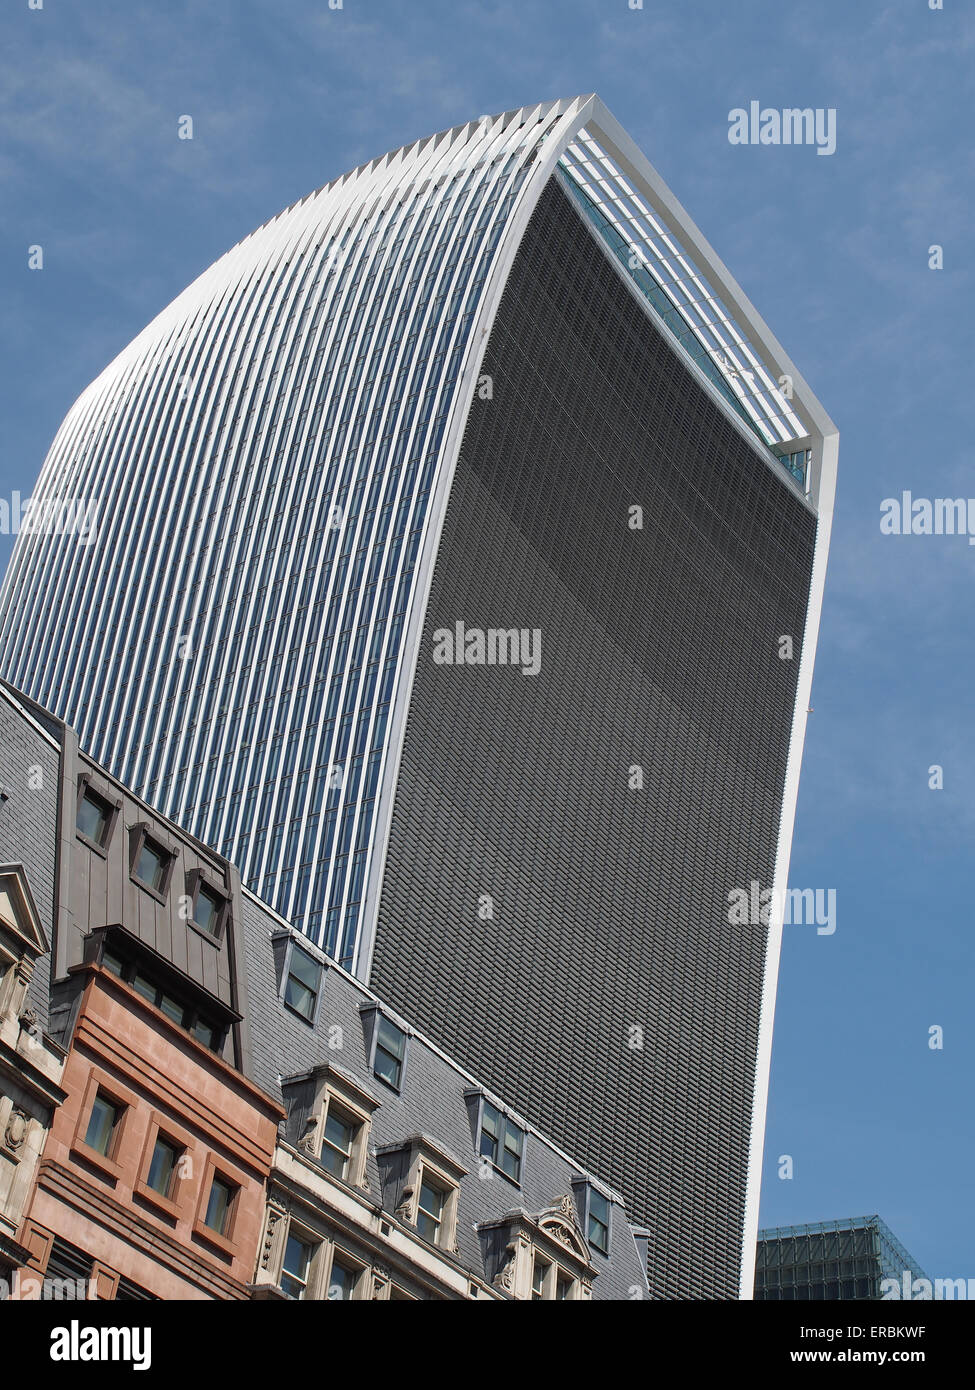 Low angle view looking up at 20 Fenchurch Street aka the Walkie Talkie building in London Stock Photo